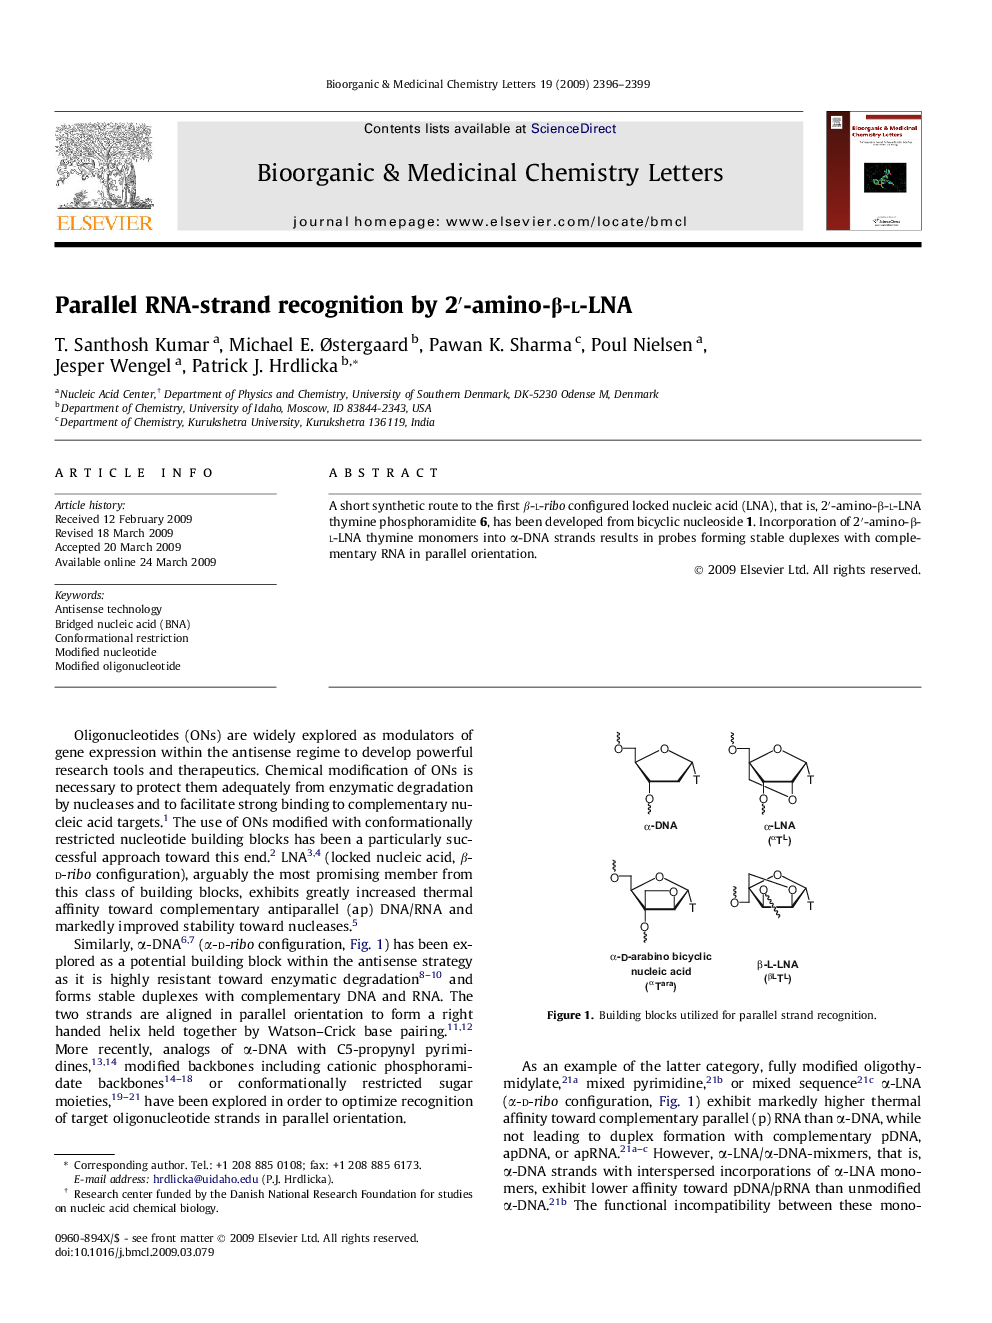 Parallel RNA-strand recognition by 2′-amino-β-l-LNA